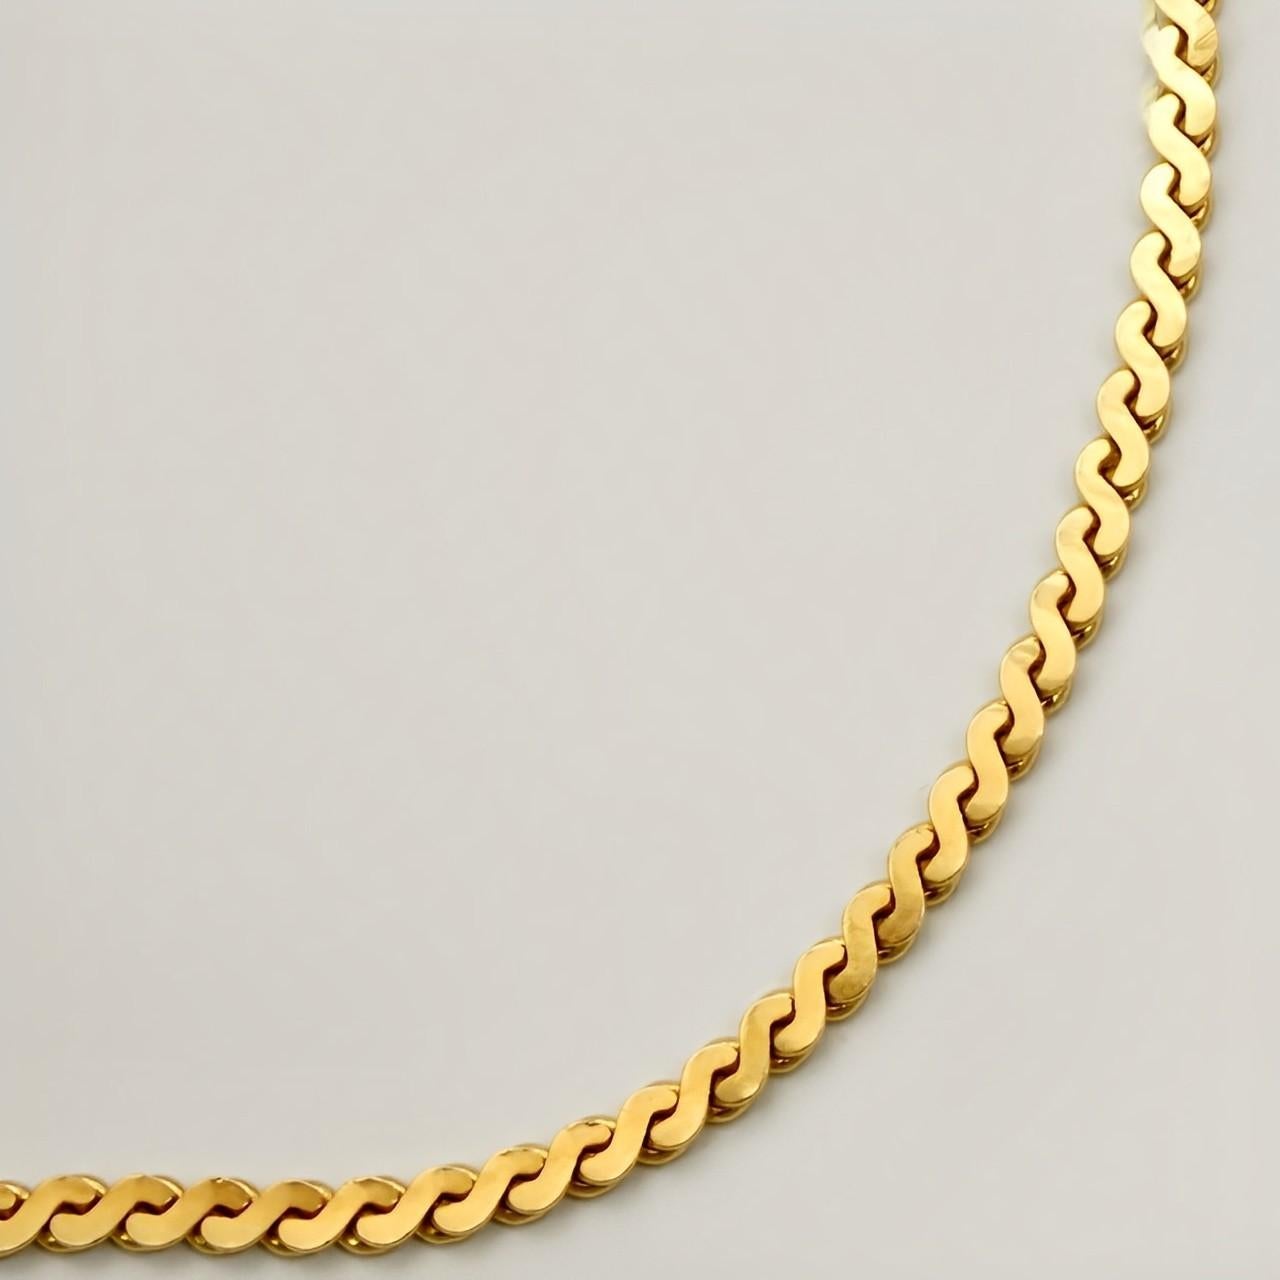 Gold Plated Plaited Serpentine Chain Tassel Necklace circa 1980s In Good Condition For Sale In London, GB